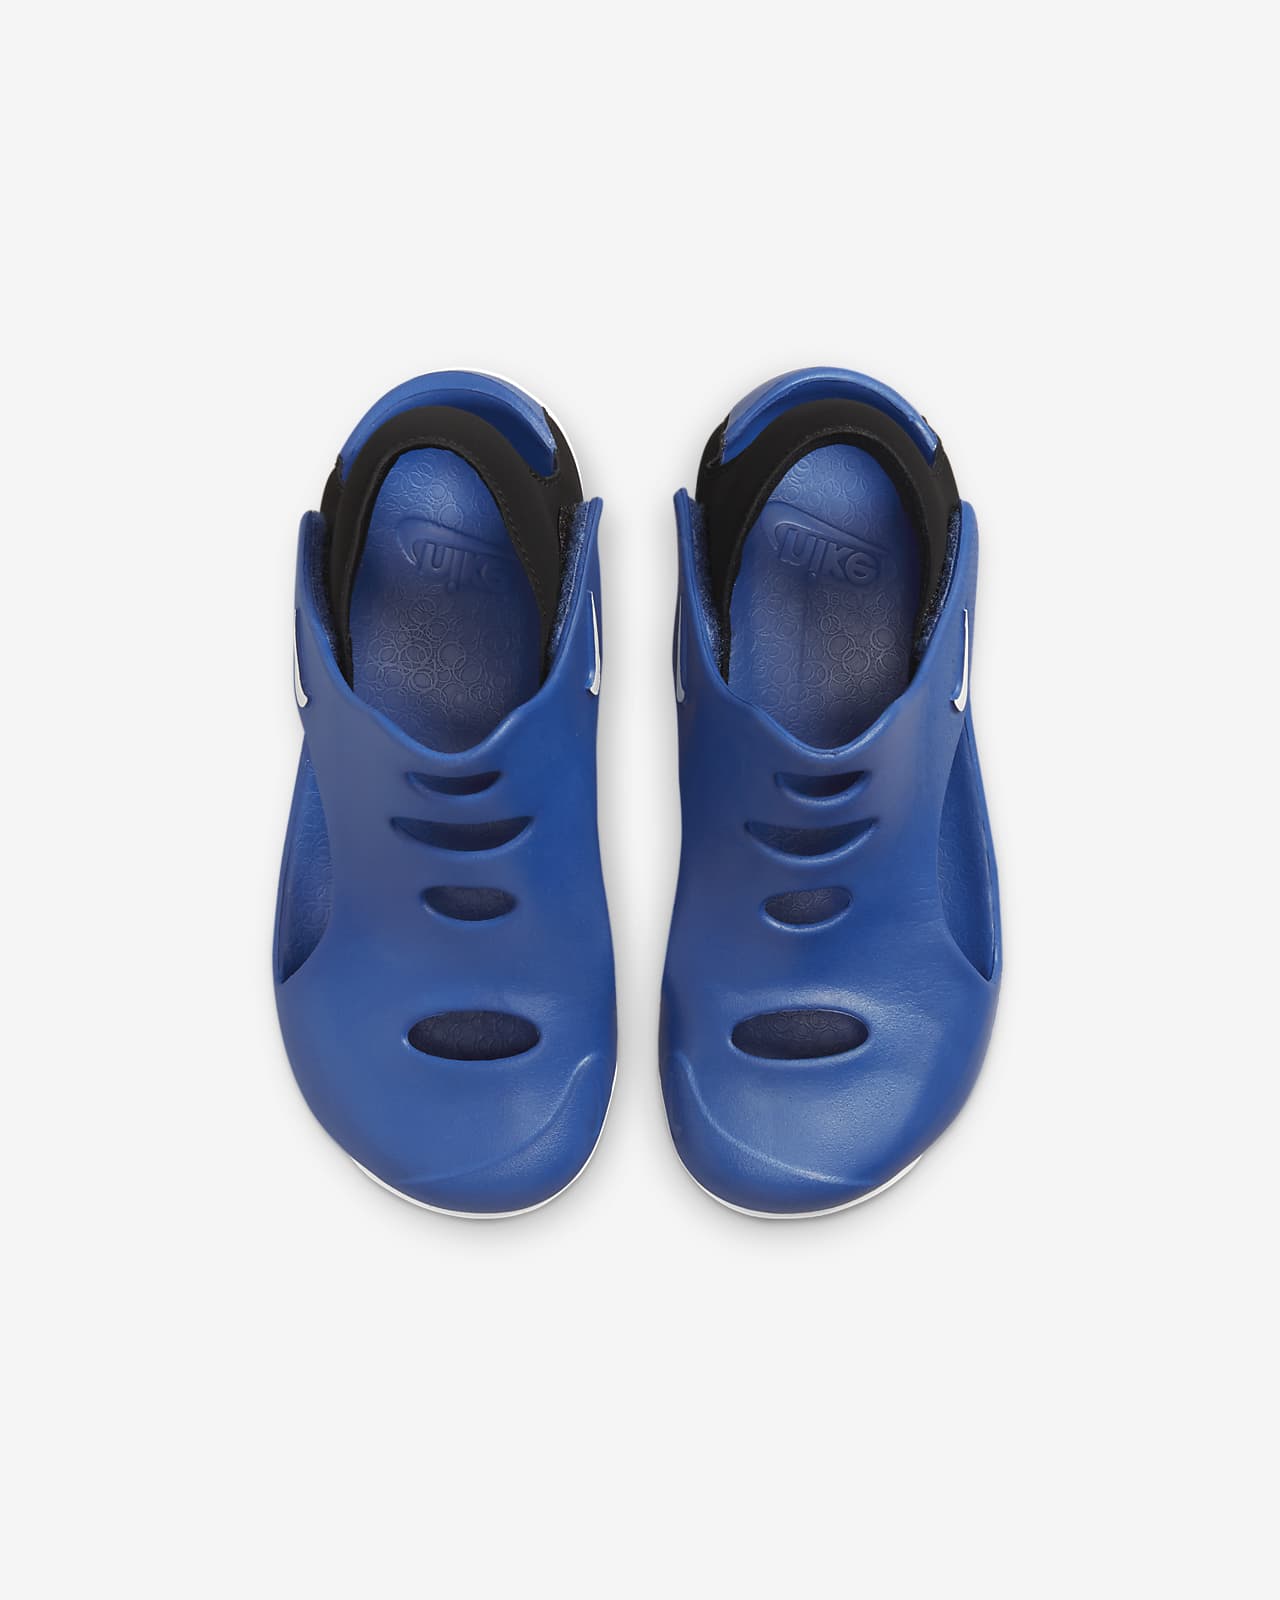 Nike Sunray Protect 3 Younger Sandals. LU Nike Kids